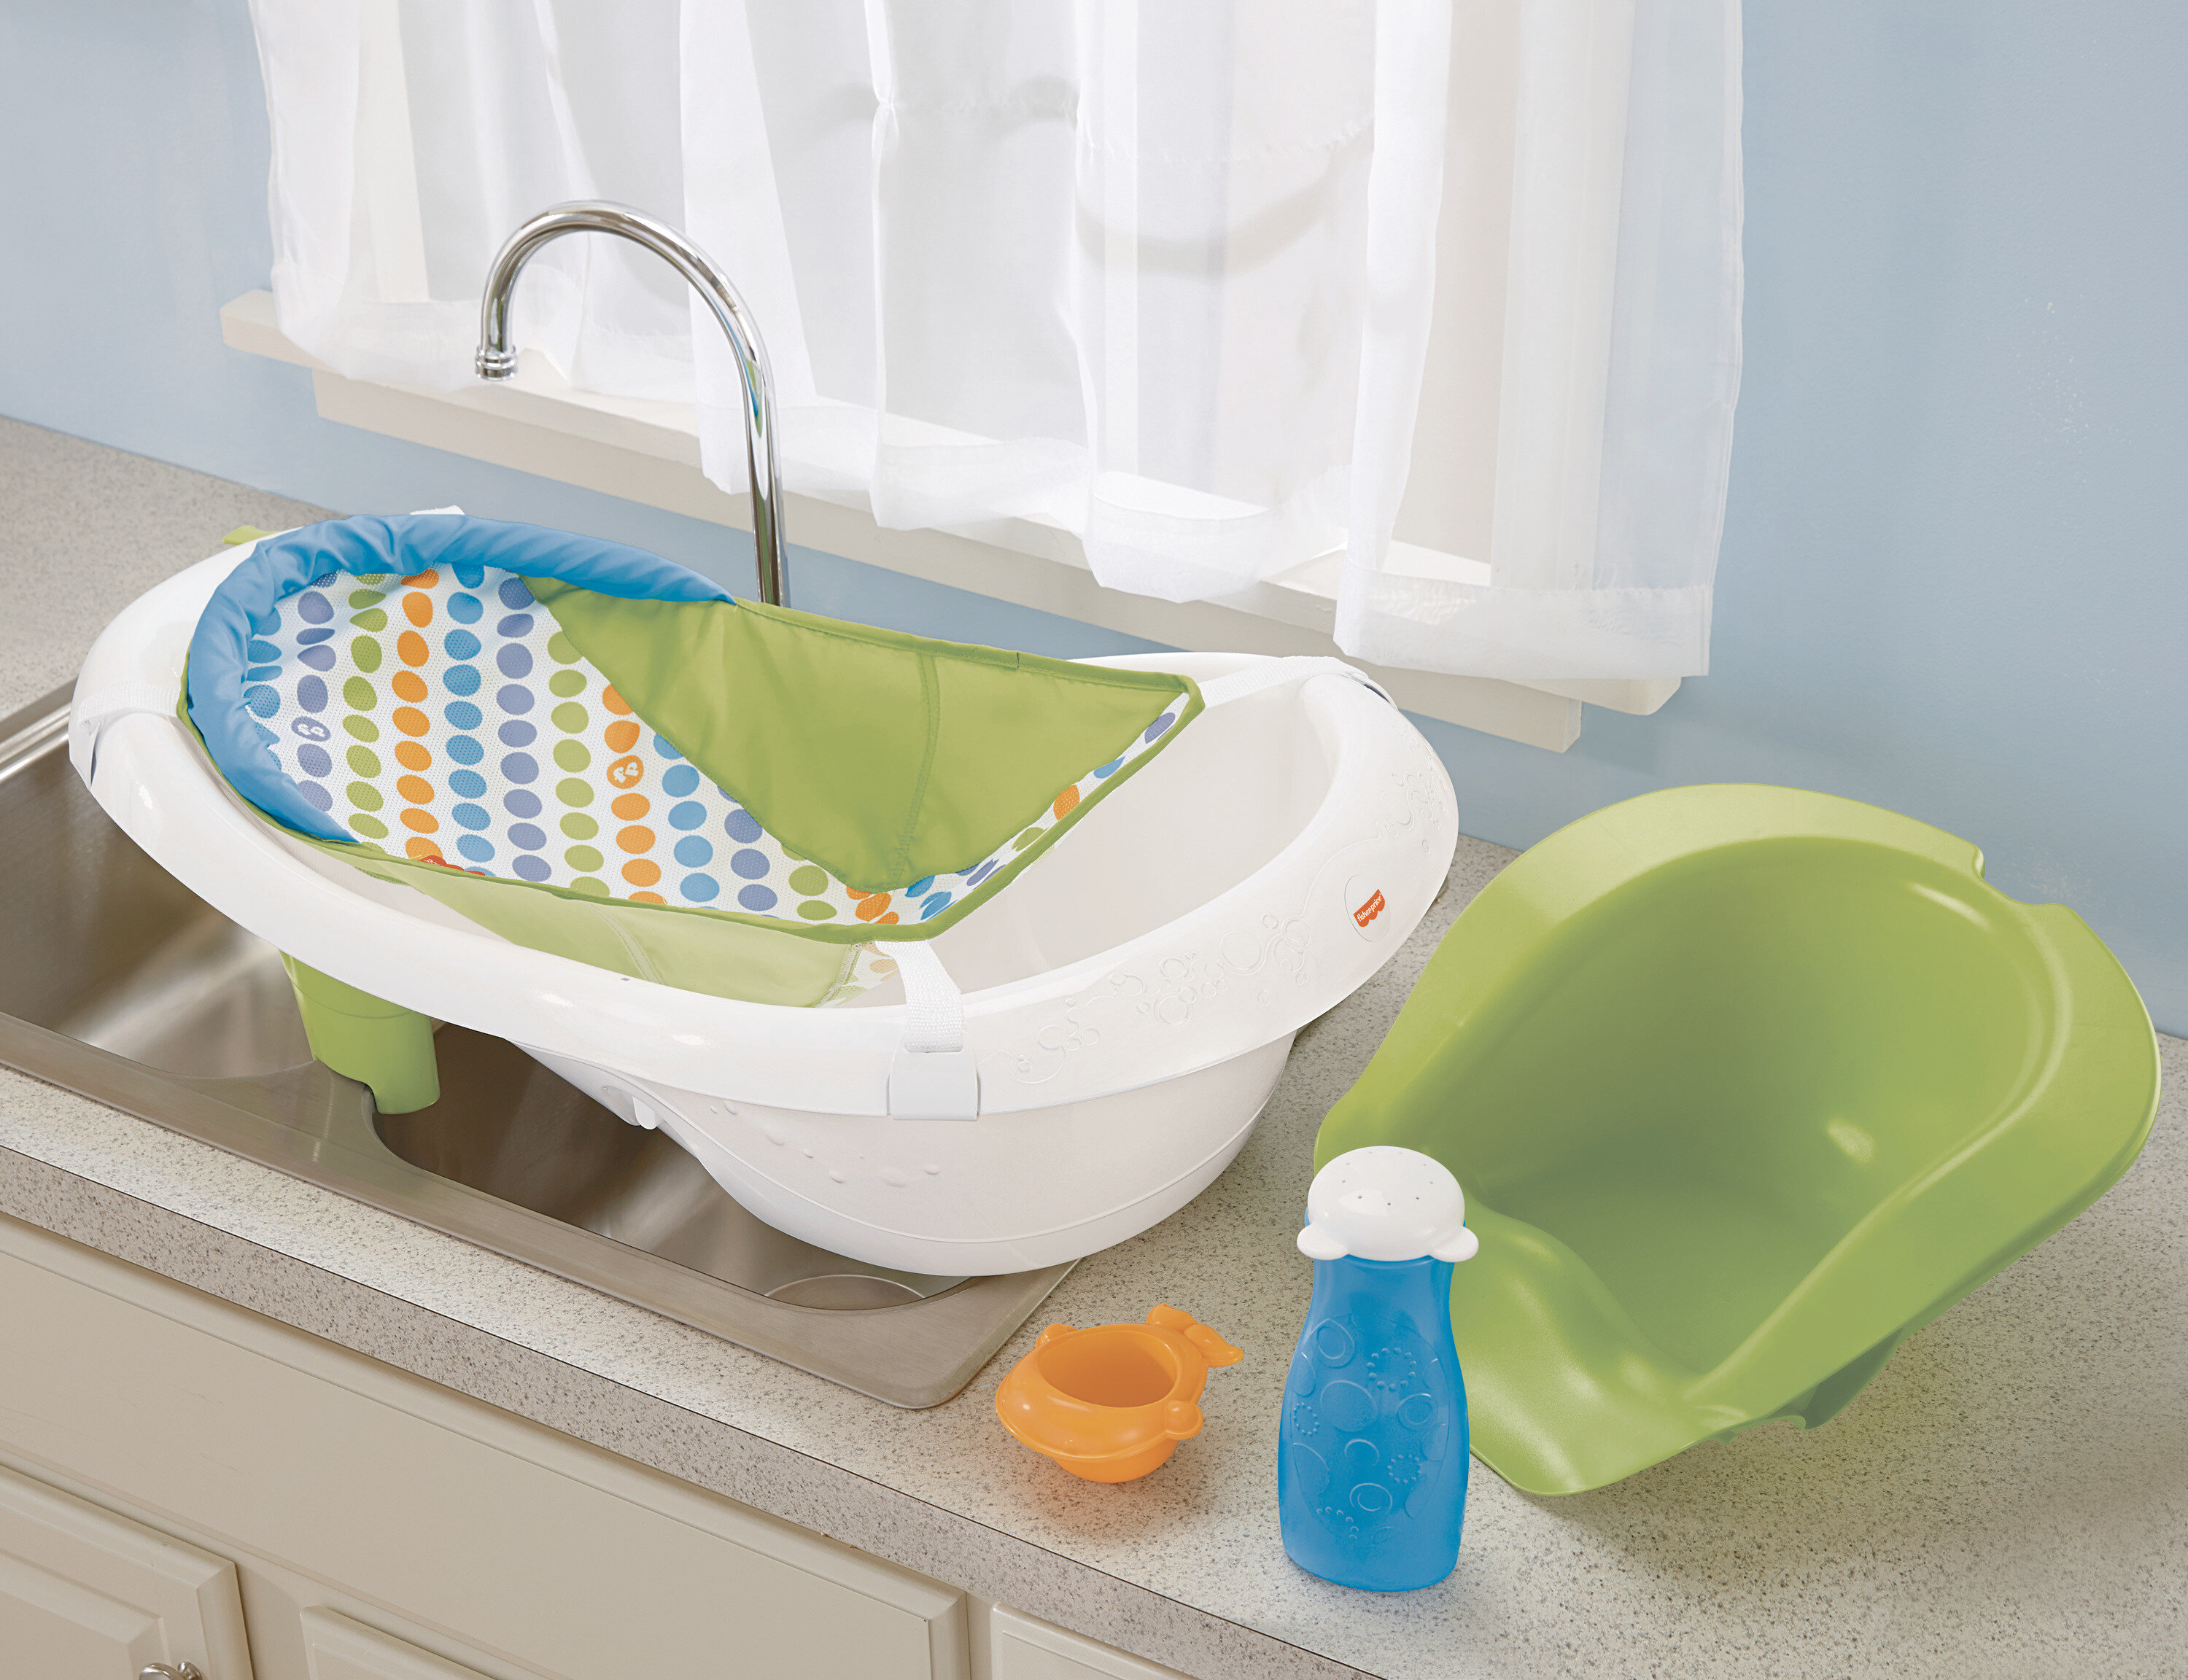 Fisher-Price 4-in-1 Sling ‘n Seat Tub Adjustable Baby Bath for Infant to Toddler with 2 Toys, Unisex - image 4 of 7